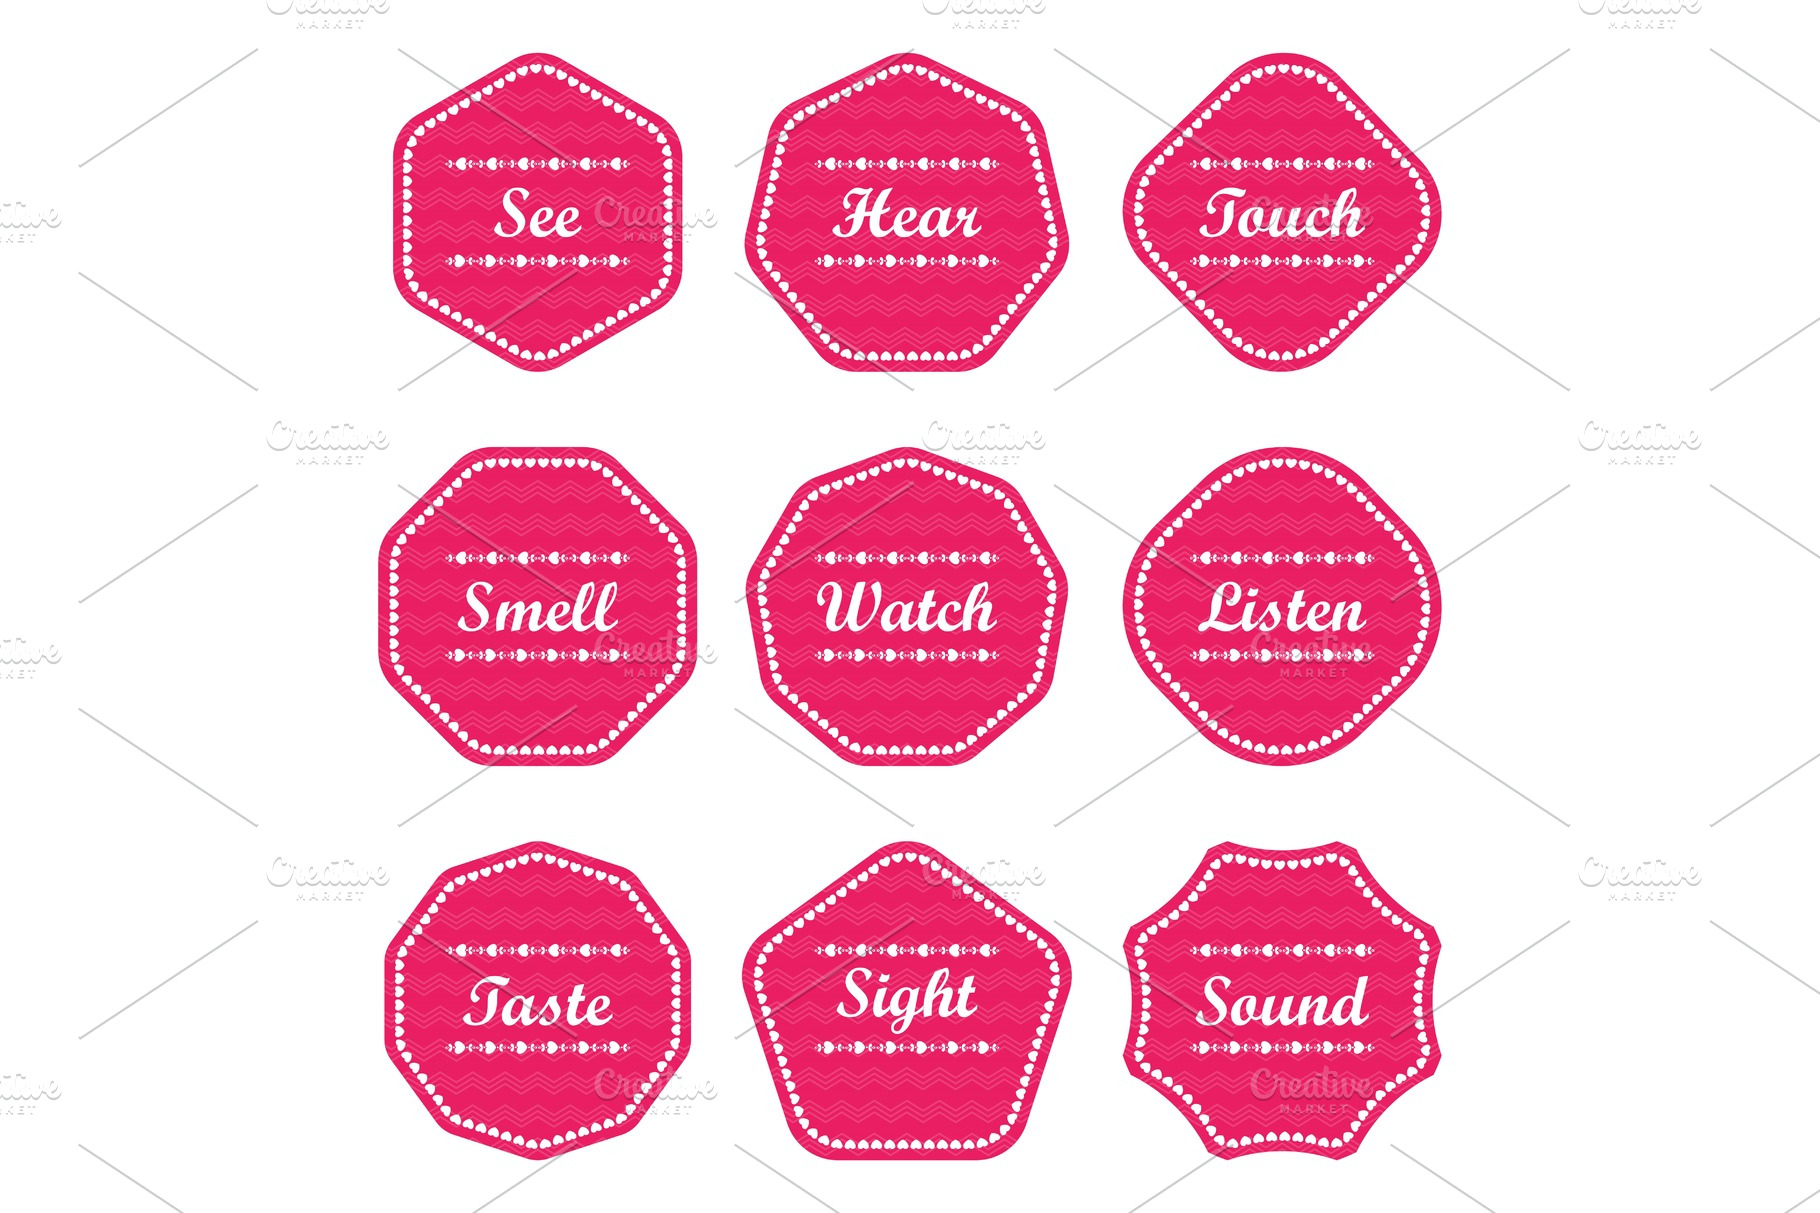 five-senses-gift-tags-and-card-flat-illustrations-creative-market